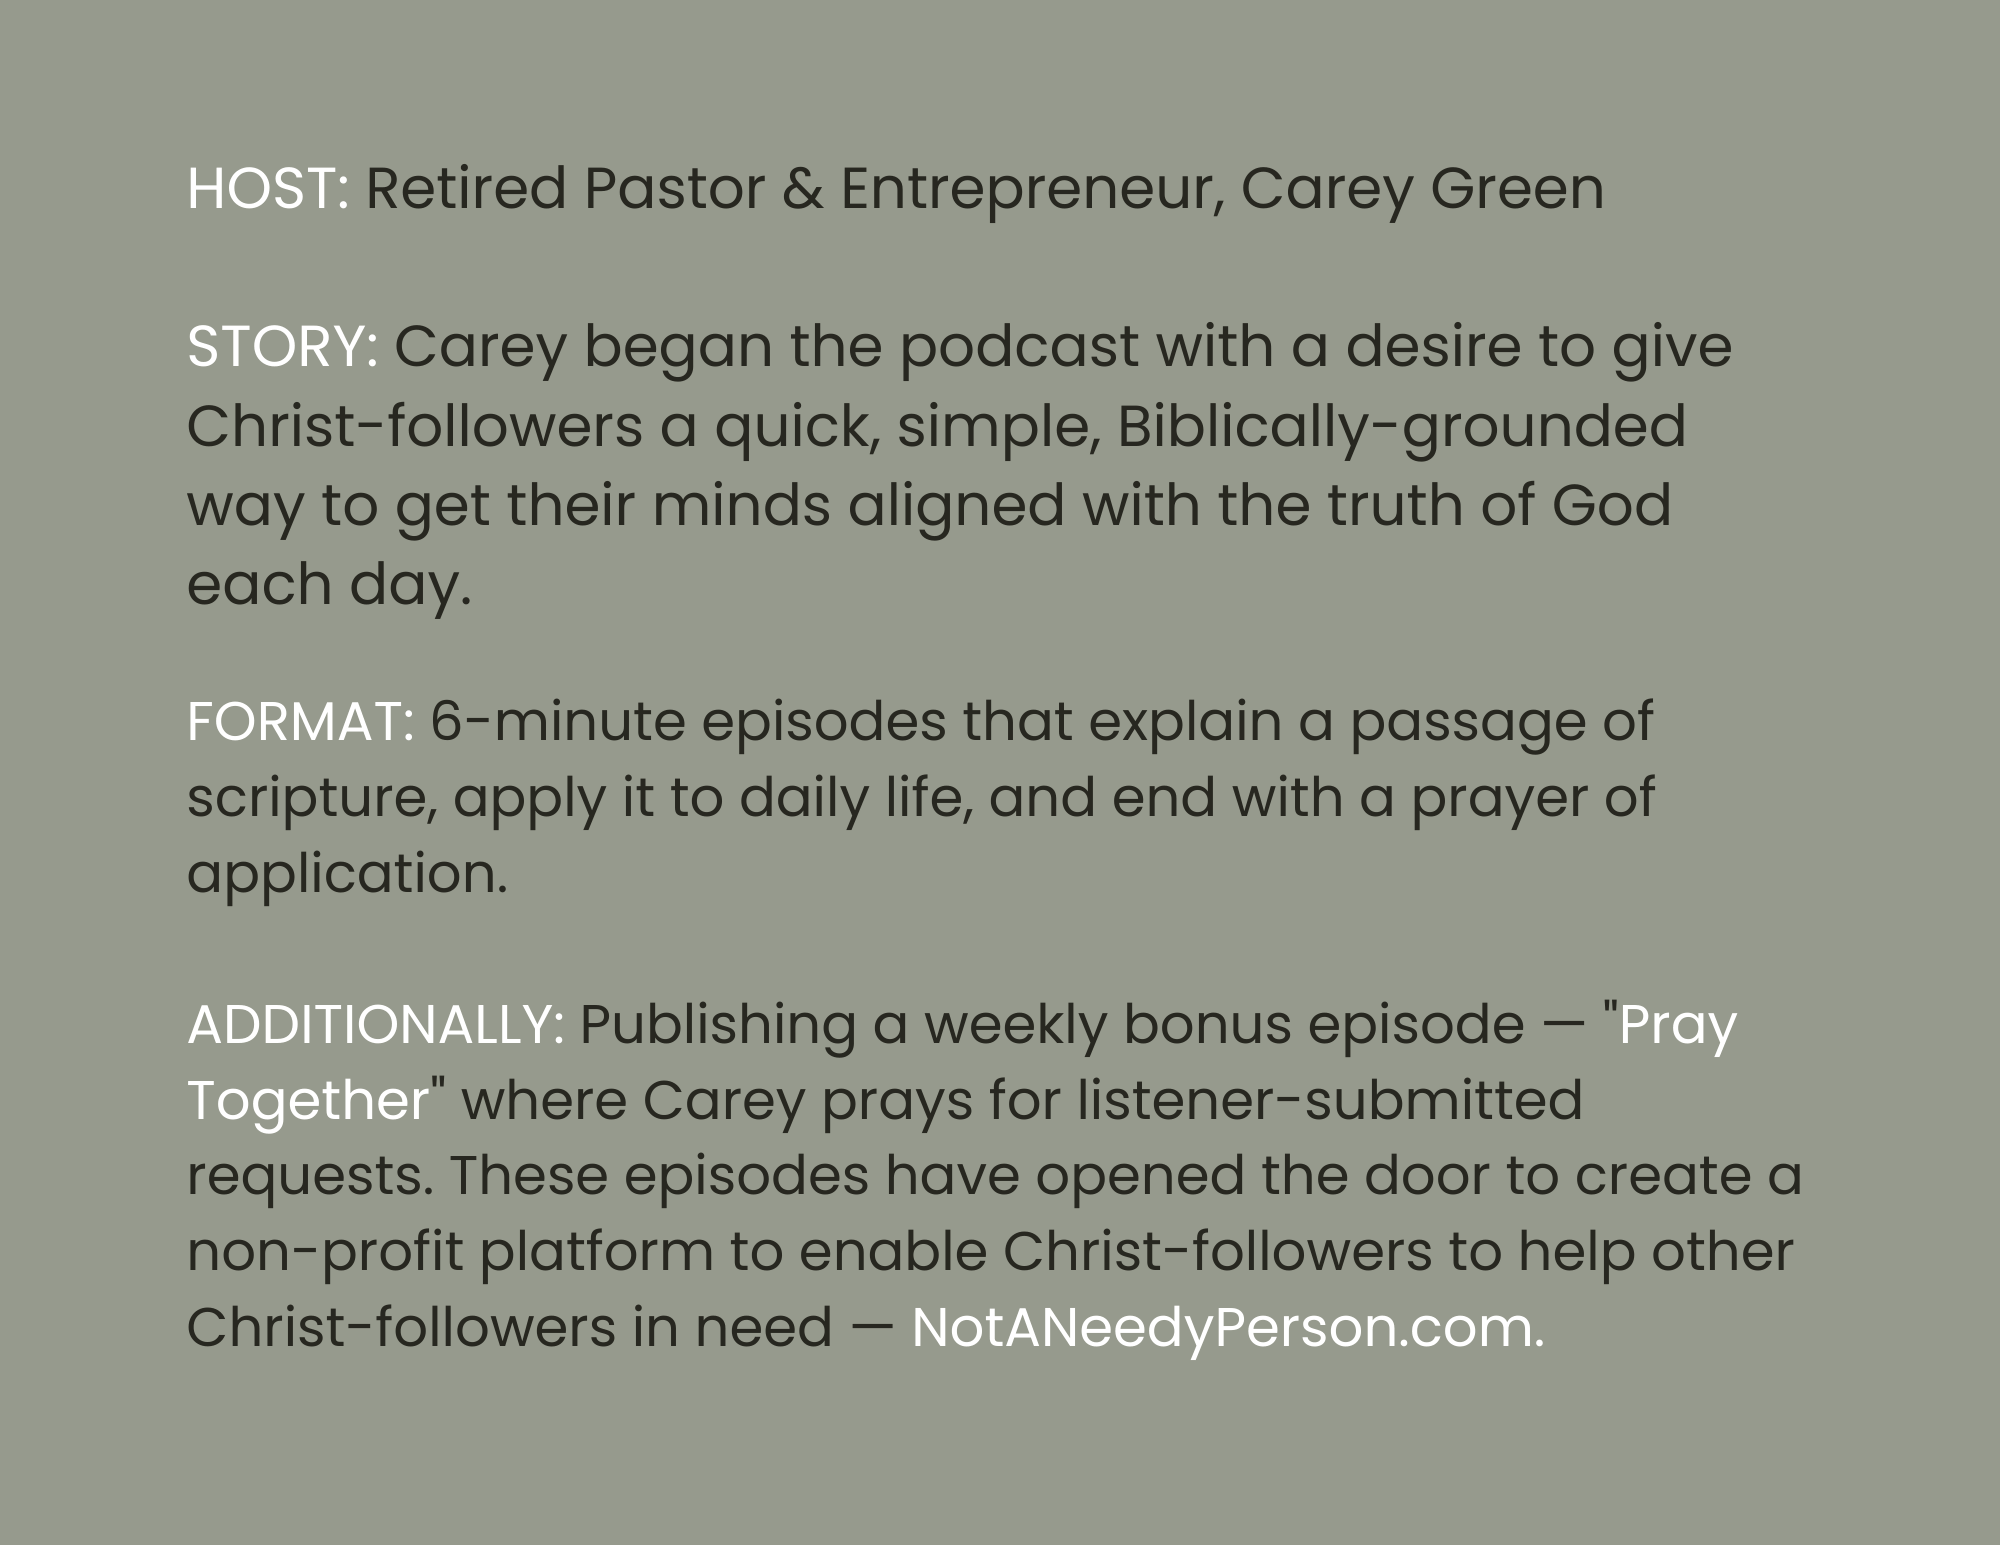 Why the Morning Mindset Daily Christian Devotional podcast is a great sponsorship opportunity